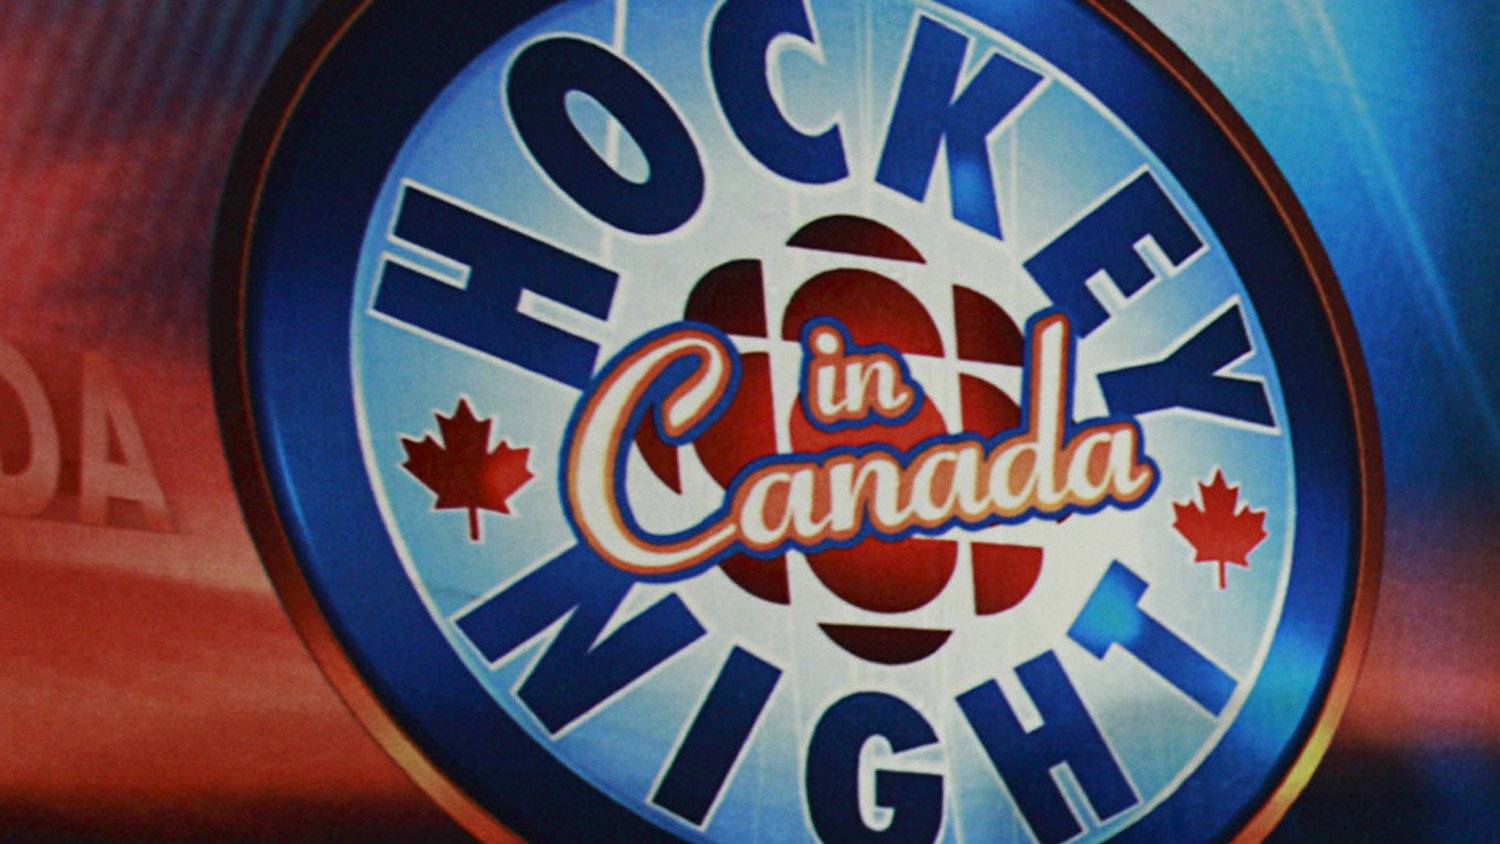 CBC closes in on pricey deal with NHL to keep rights to Hockey Night in Canada